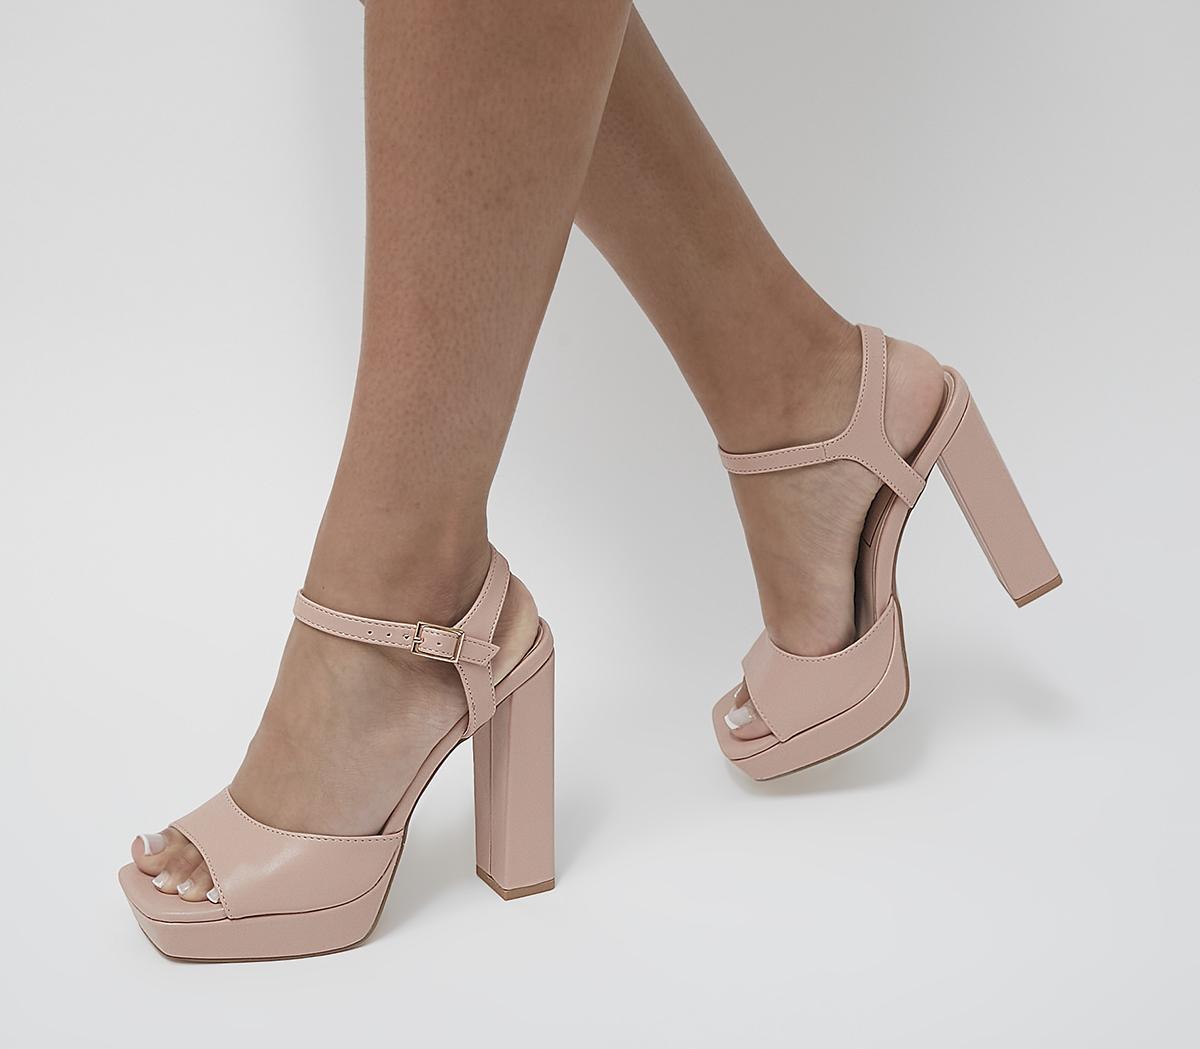 Hearty Square Toe Platform Heels Nude In Natural